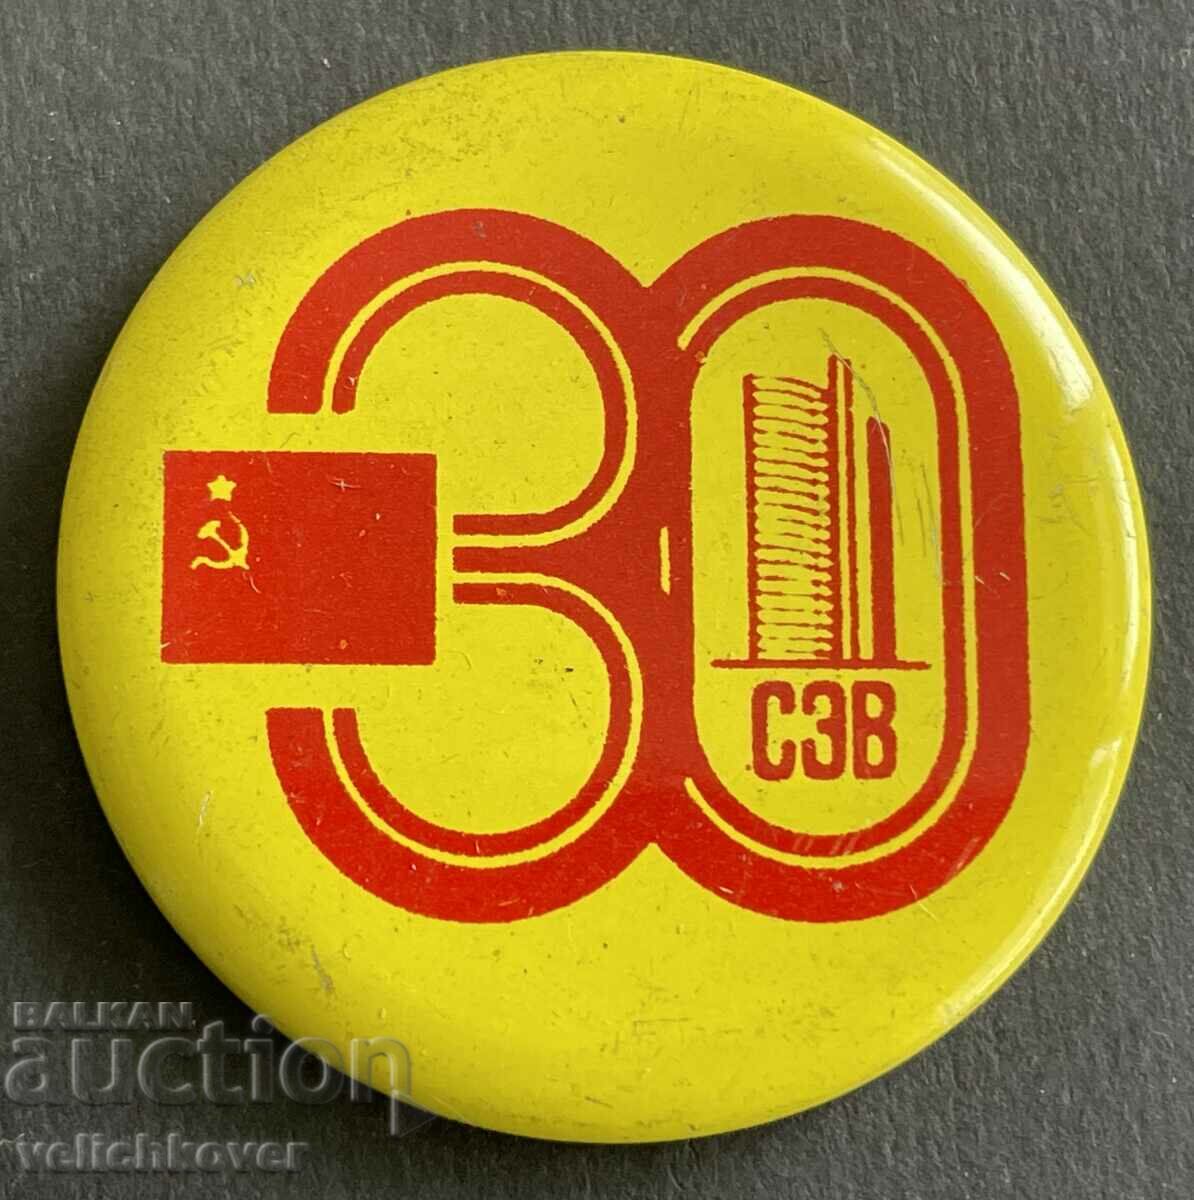 37416 USSR sign 30 years. SIV Council for Mutual Economic Assistance